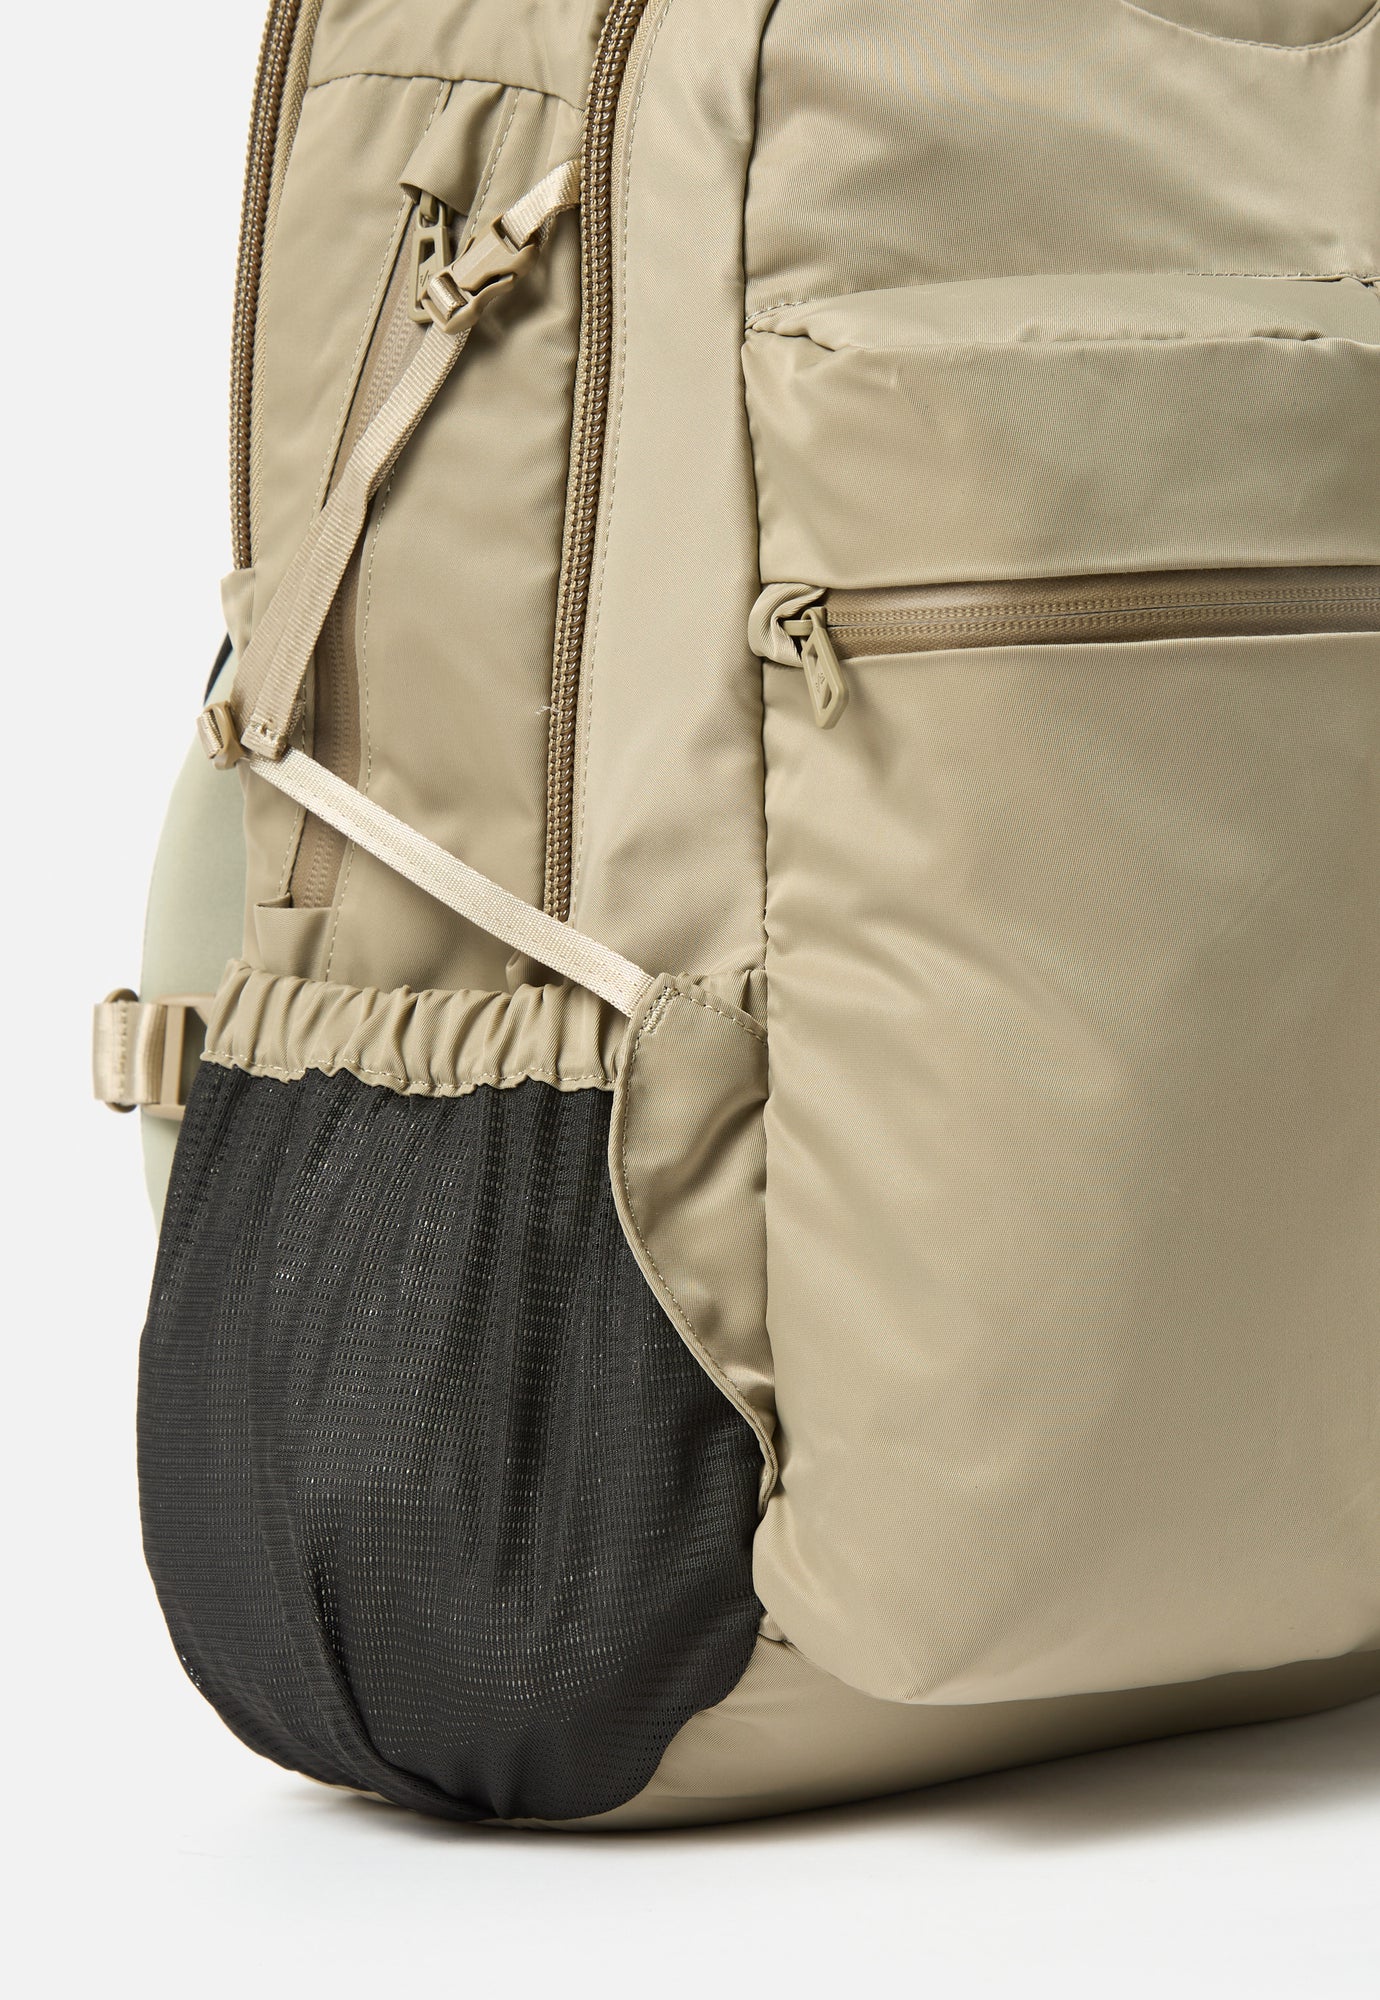 F/CE.® Urban Town Bag in Sage Green Recycled Twill Nylon